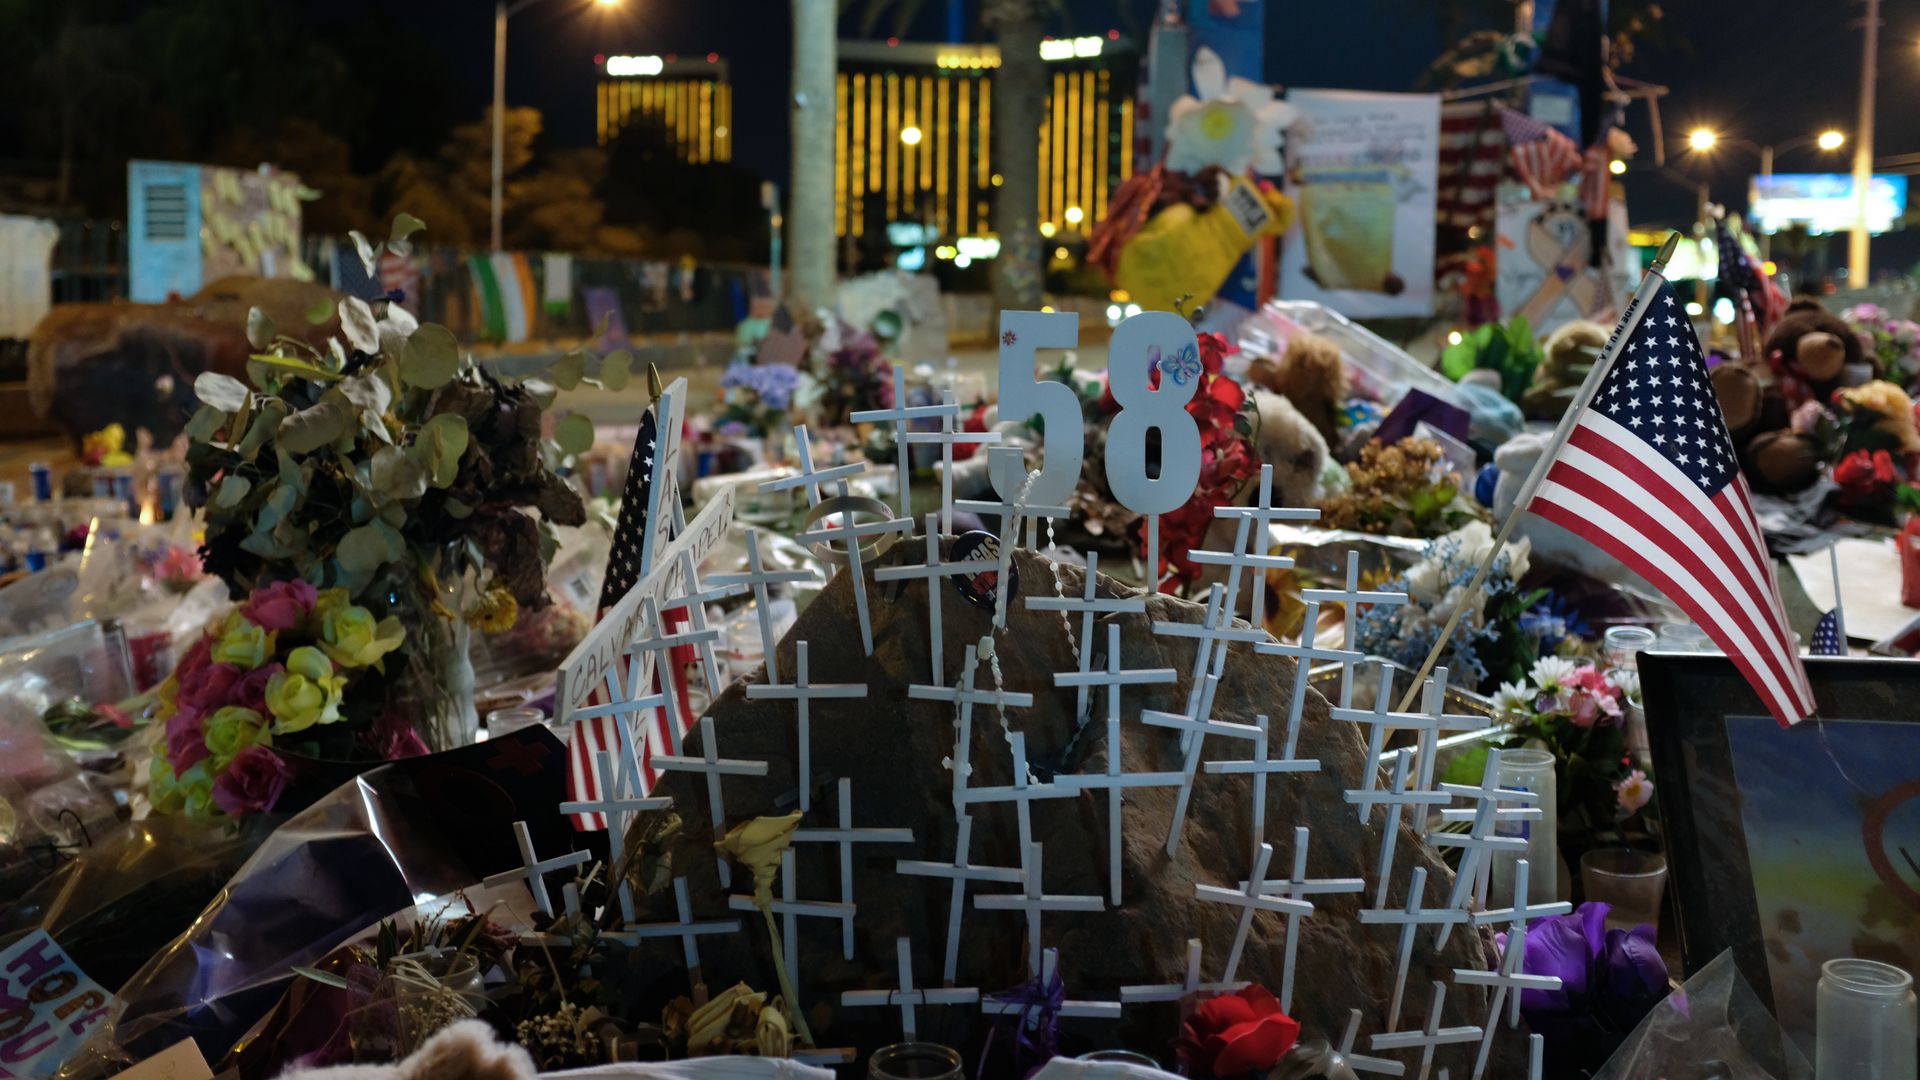 A memorial for the victims after the mass shooting in Las Vegas, Nevada, that took 58 lives, October 28, 2017.